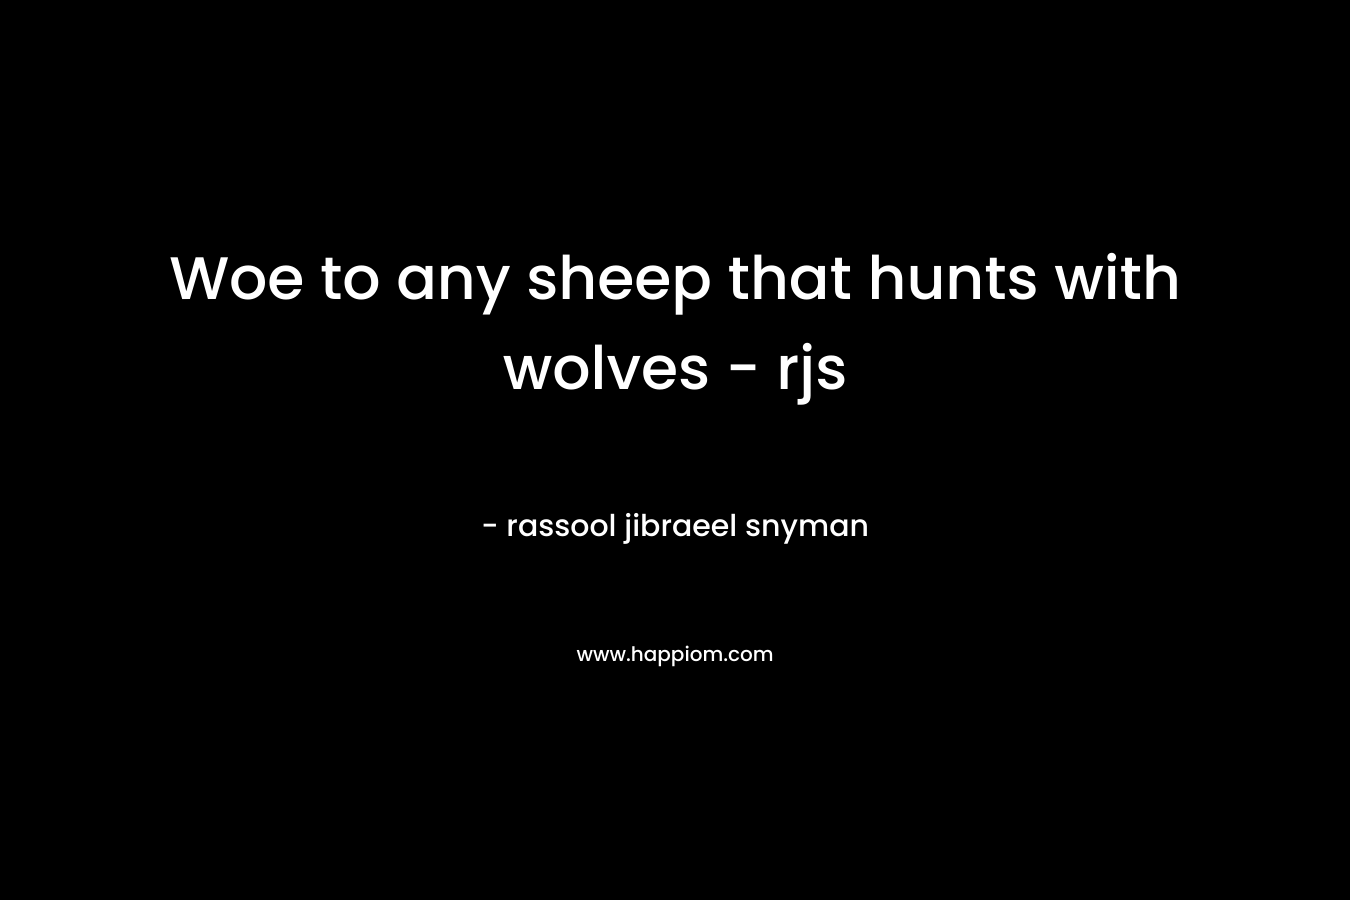 Woe to any sheep that hunts with wolves - rjs